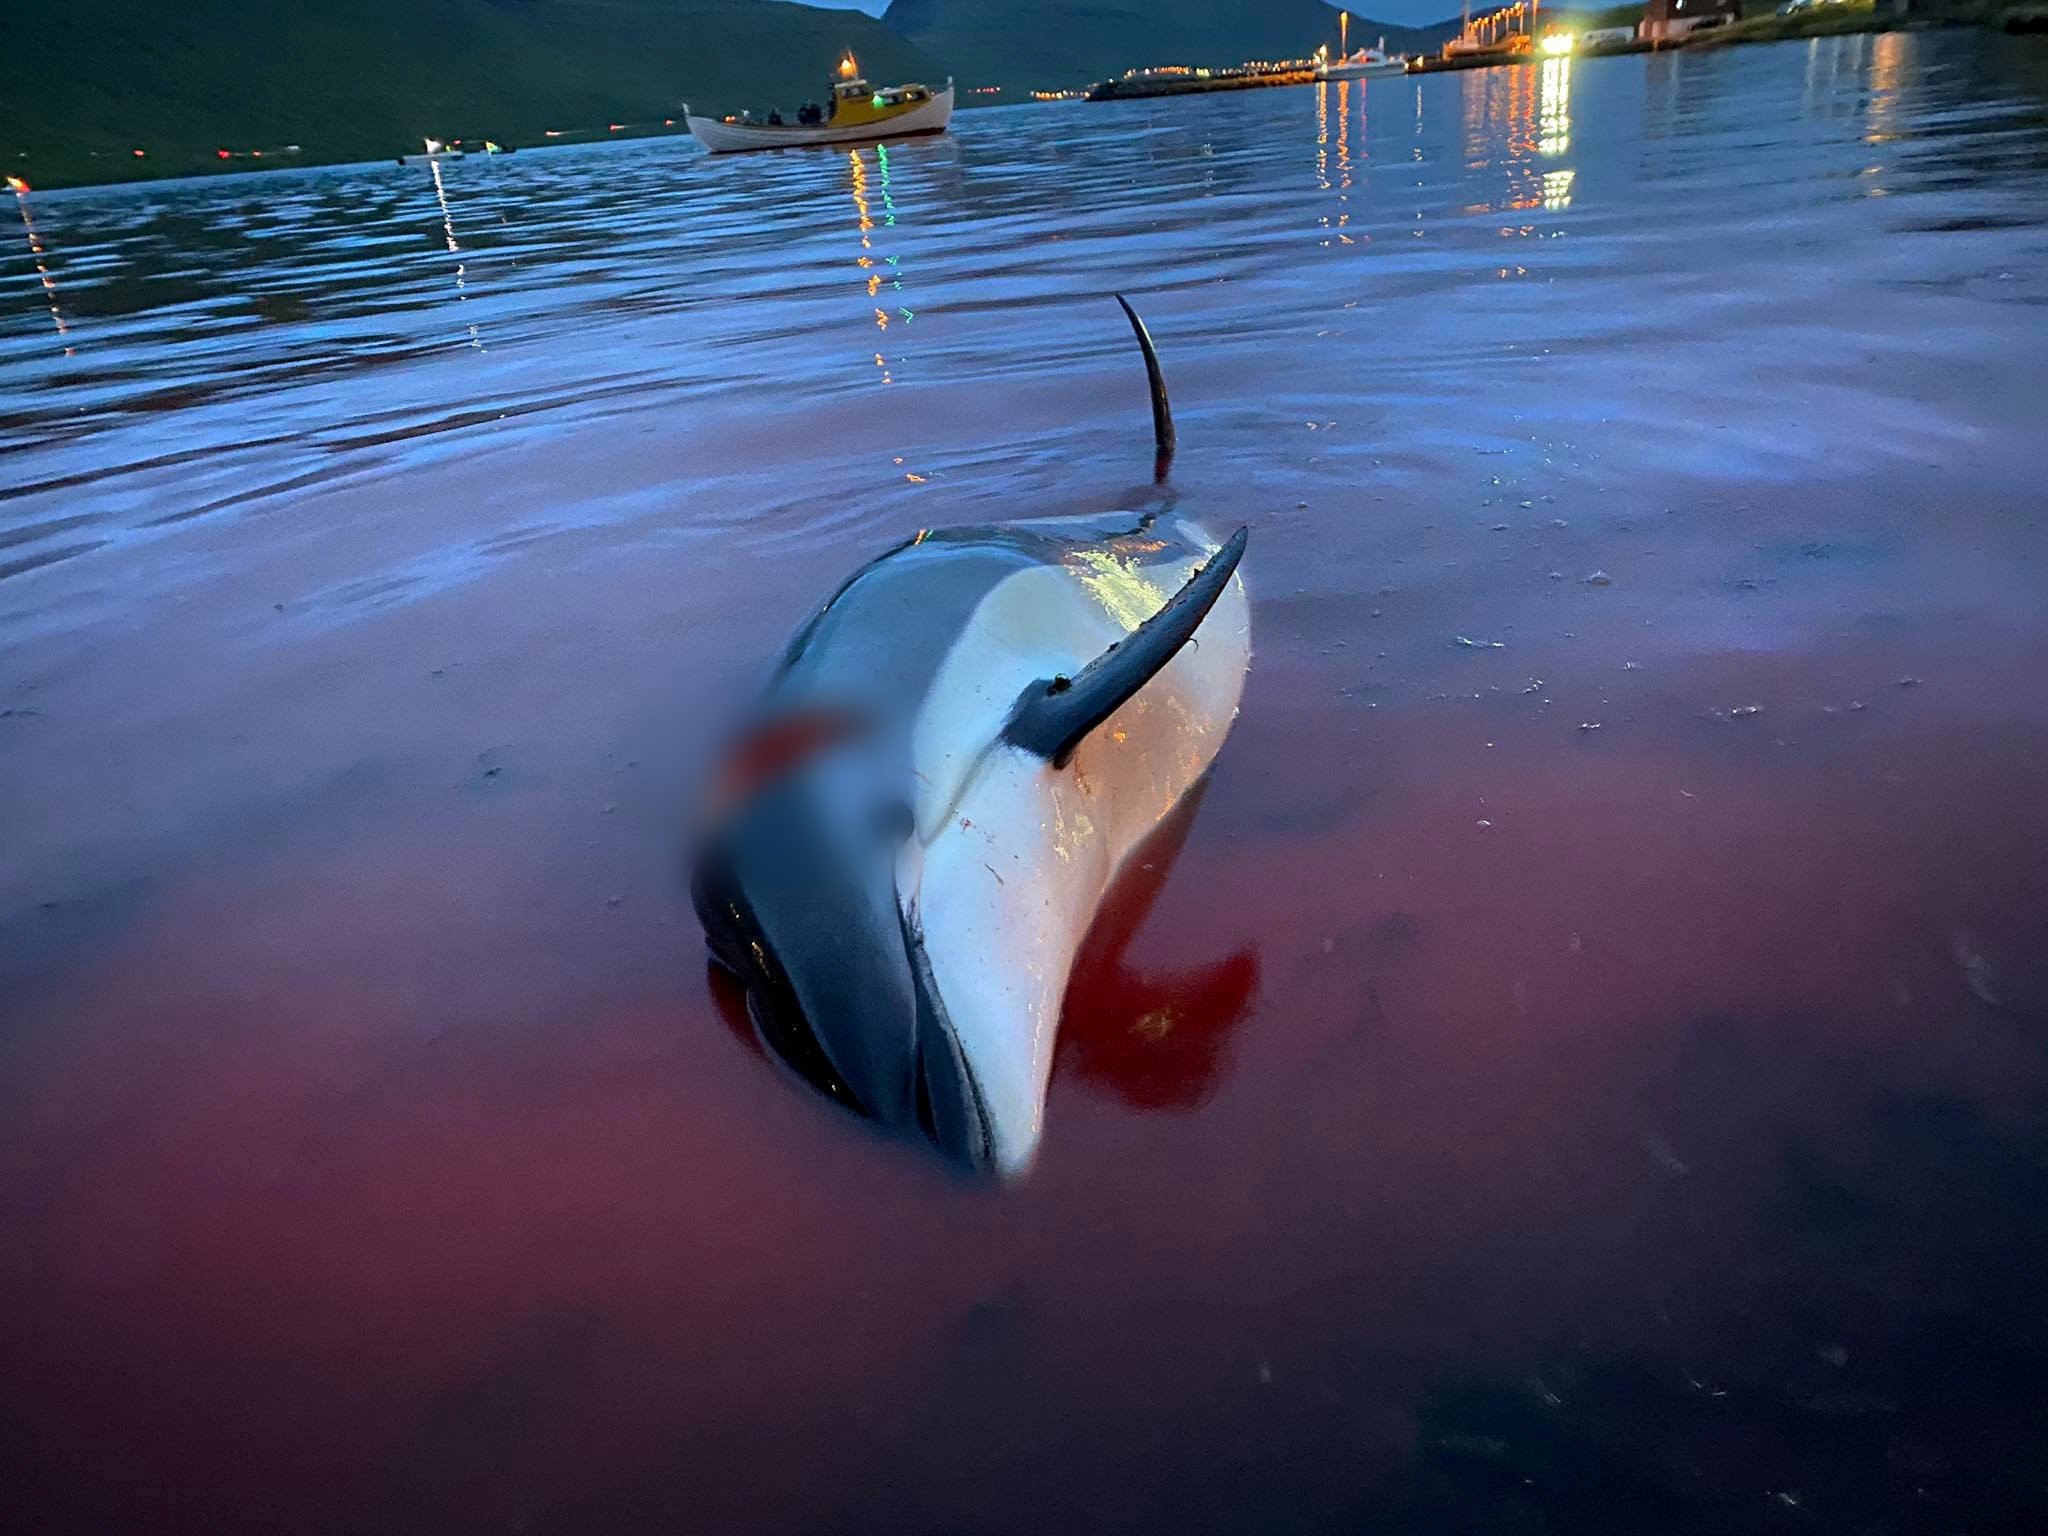 1,400 Dolphins Killed In Single Day During Annual Faroe Islands Hunt